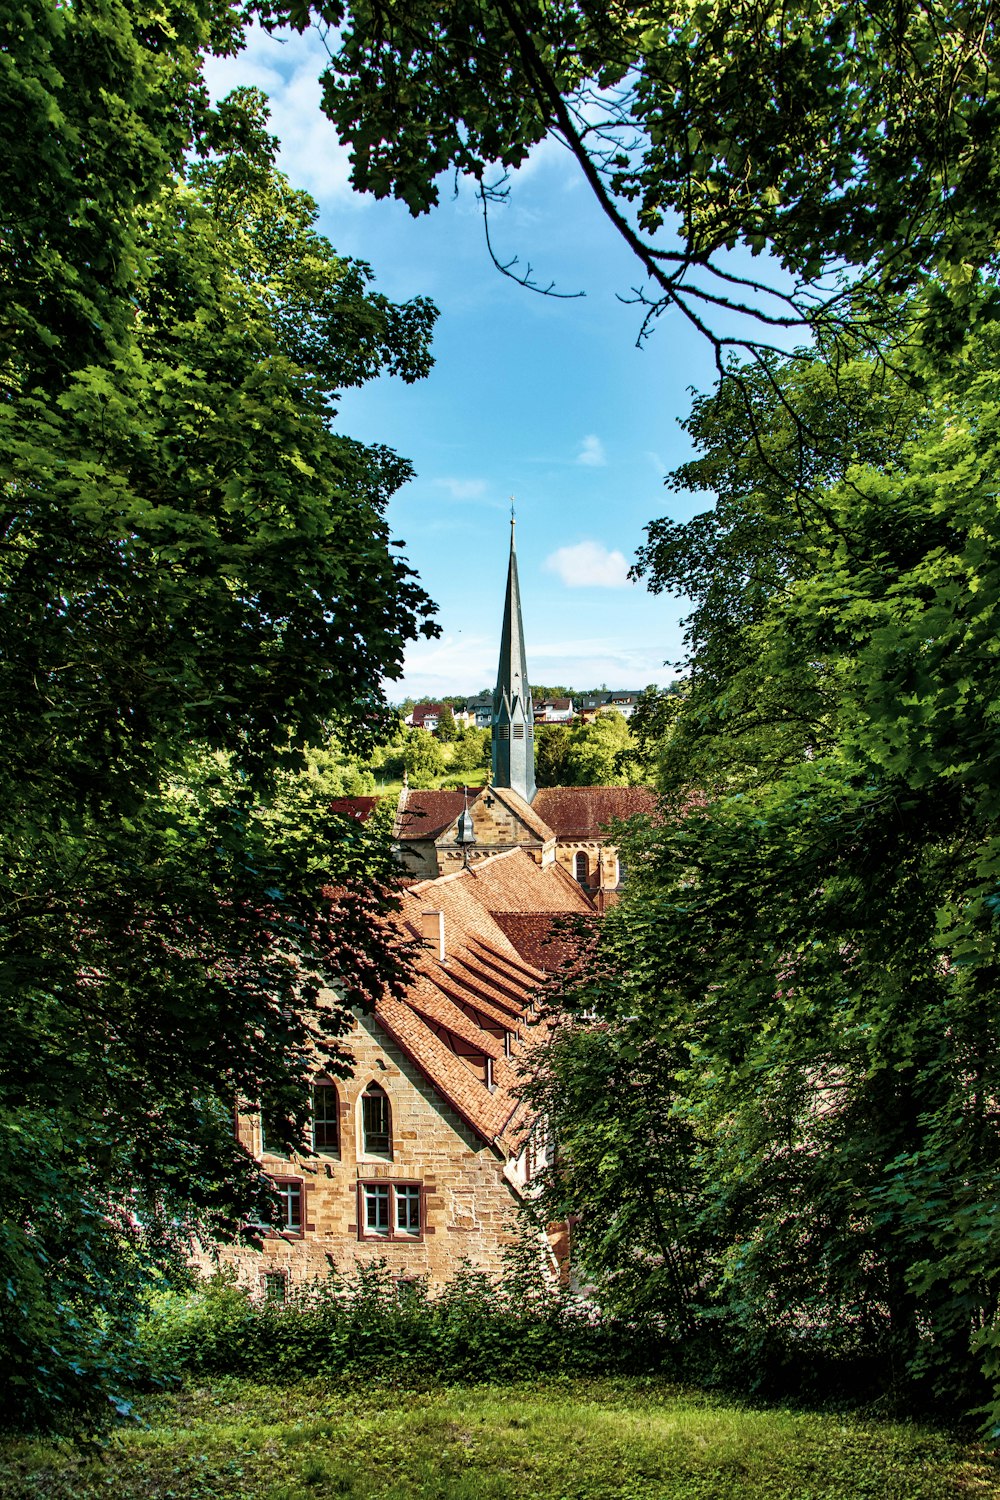 a church with a steeple surrounded by trees